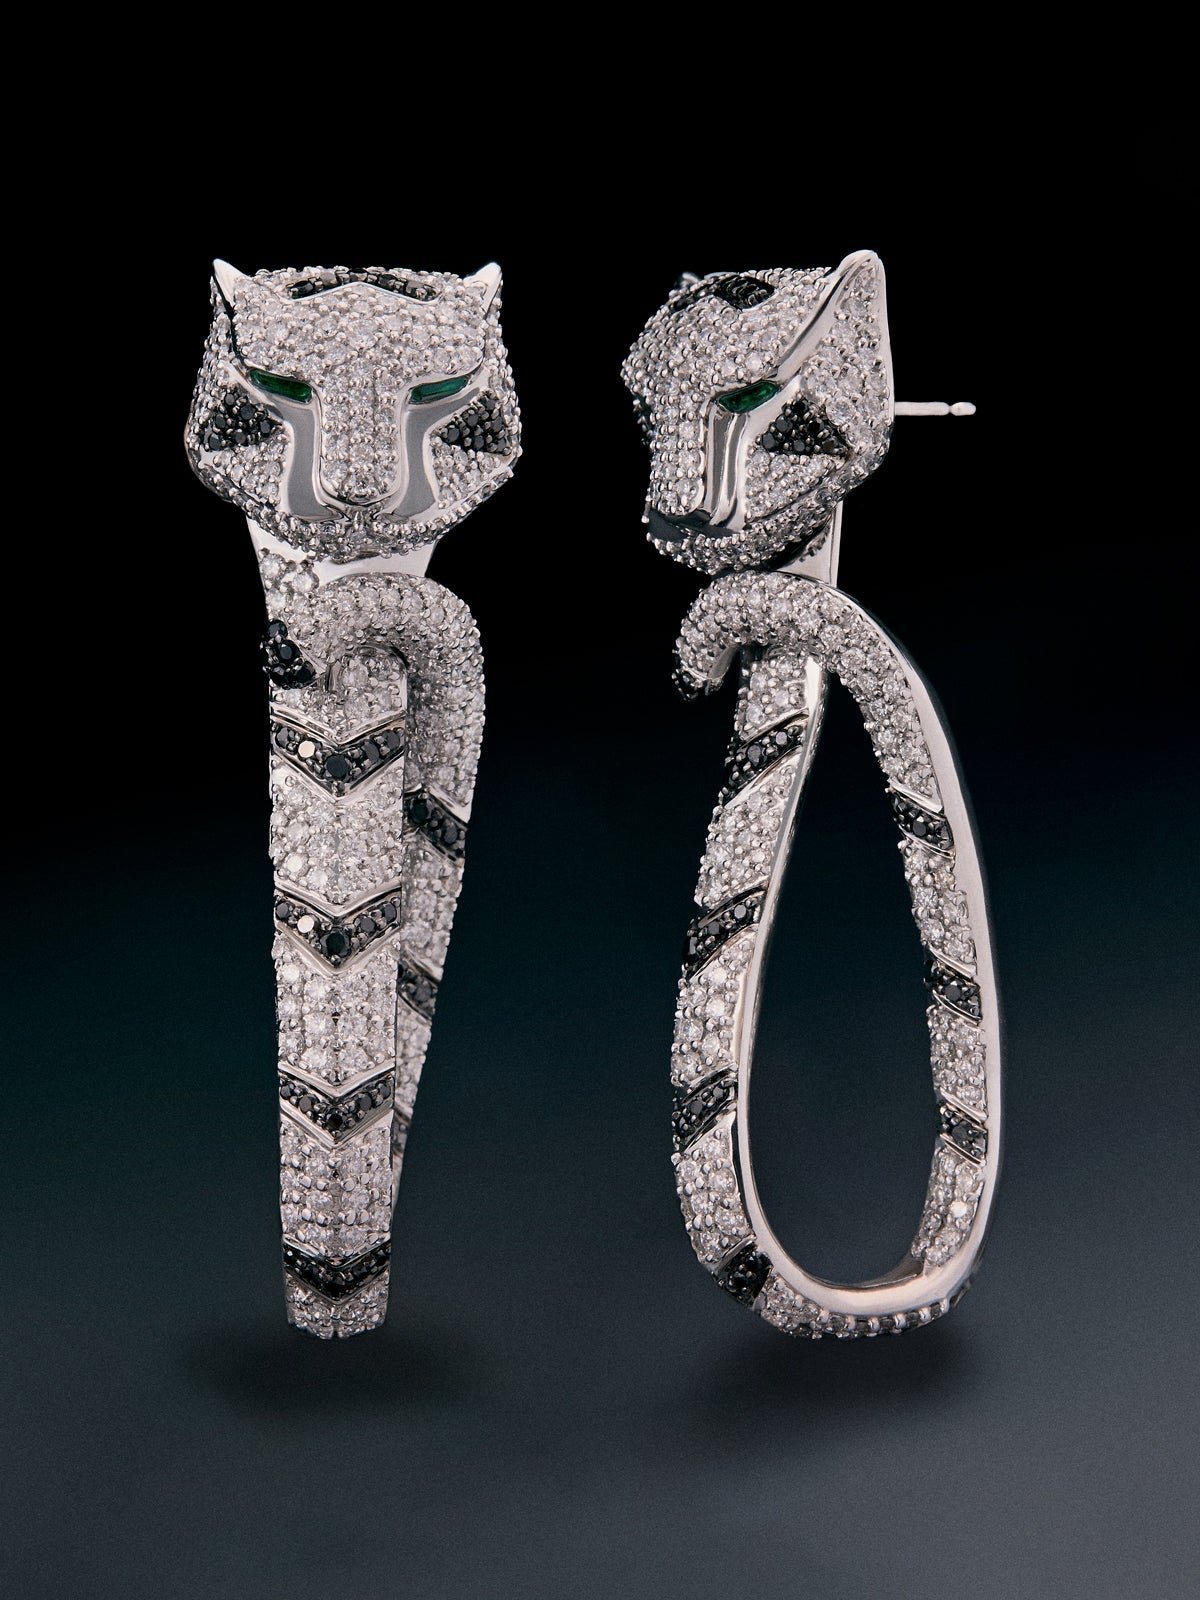 18K white gold earrings with 548 brilliant-cut white diamonds with a total of 2.68 cts, 90 black diamonds with a total of 0.47 cts, and 2 trapezoid-cut emeralds with a total of 0.26 cts shaped tiger